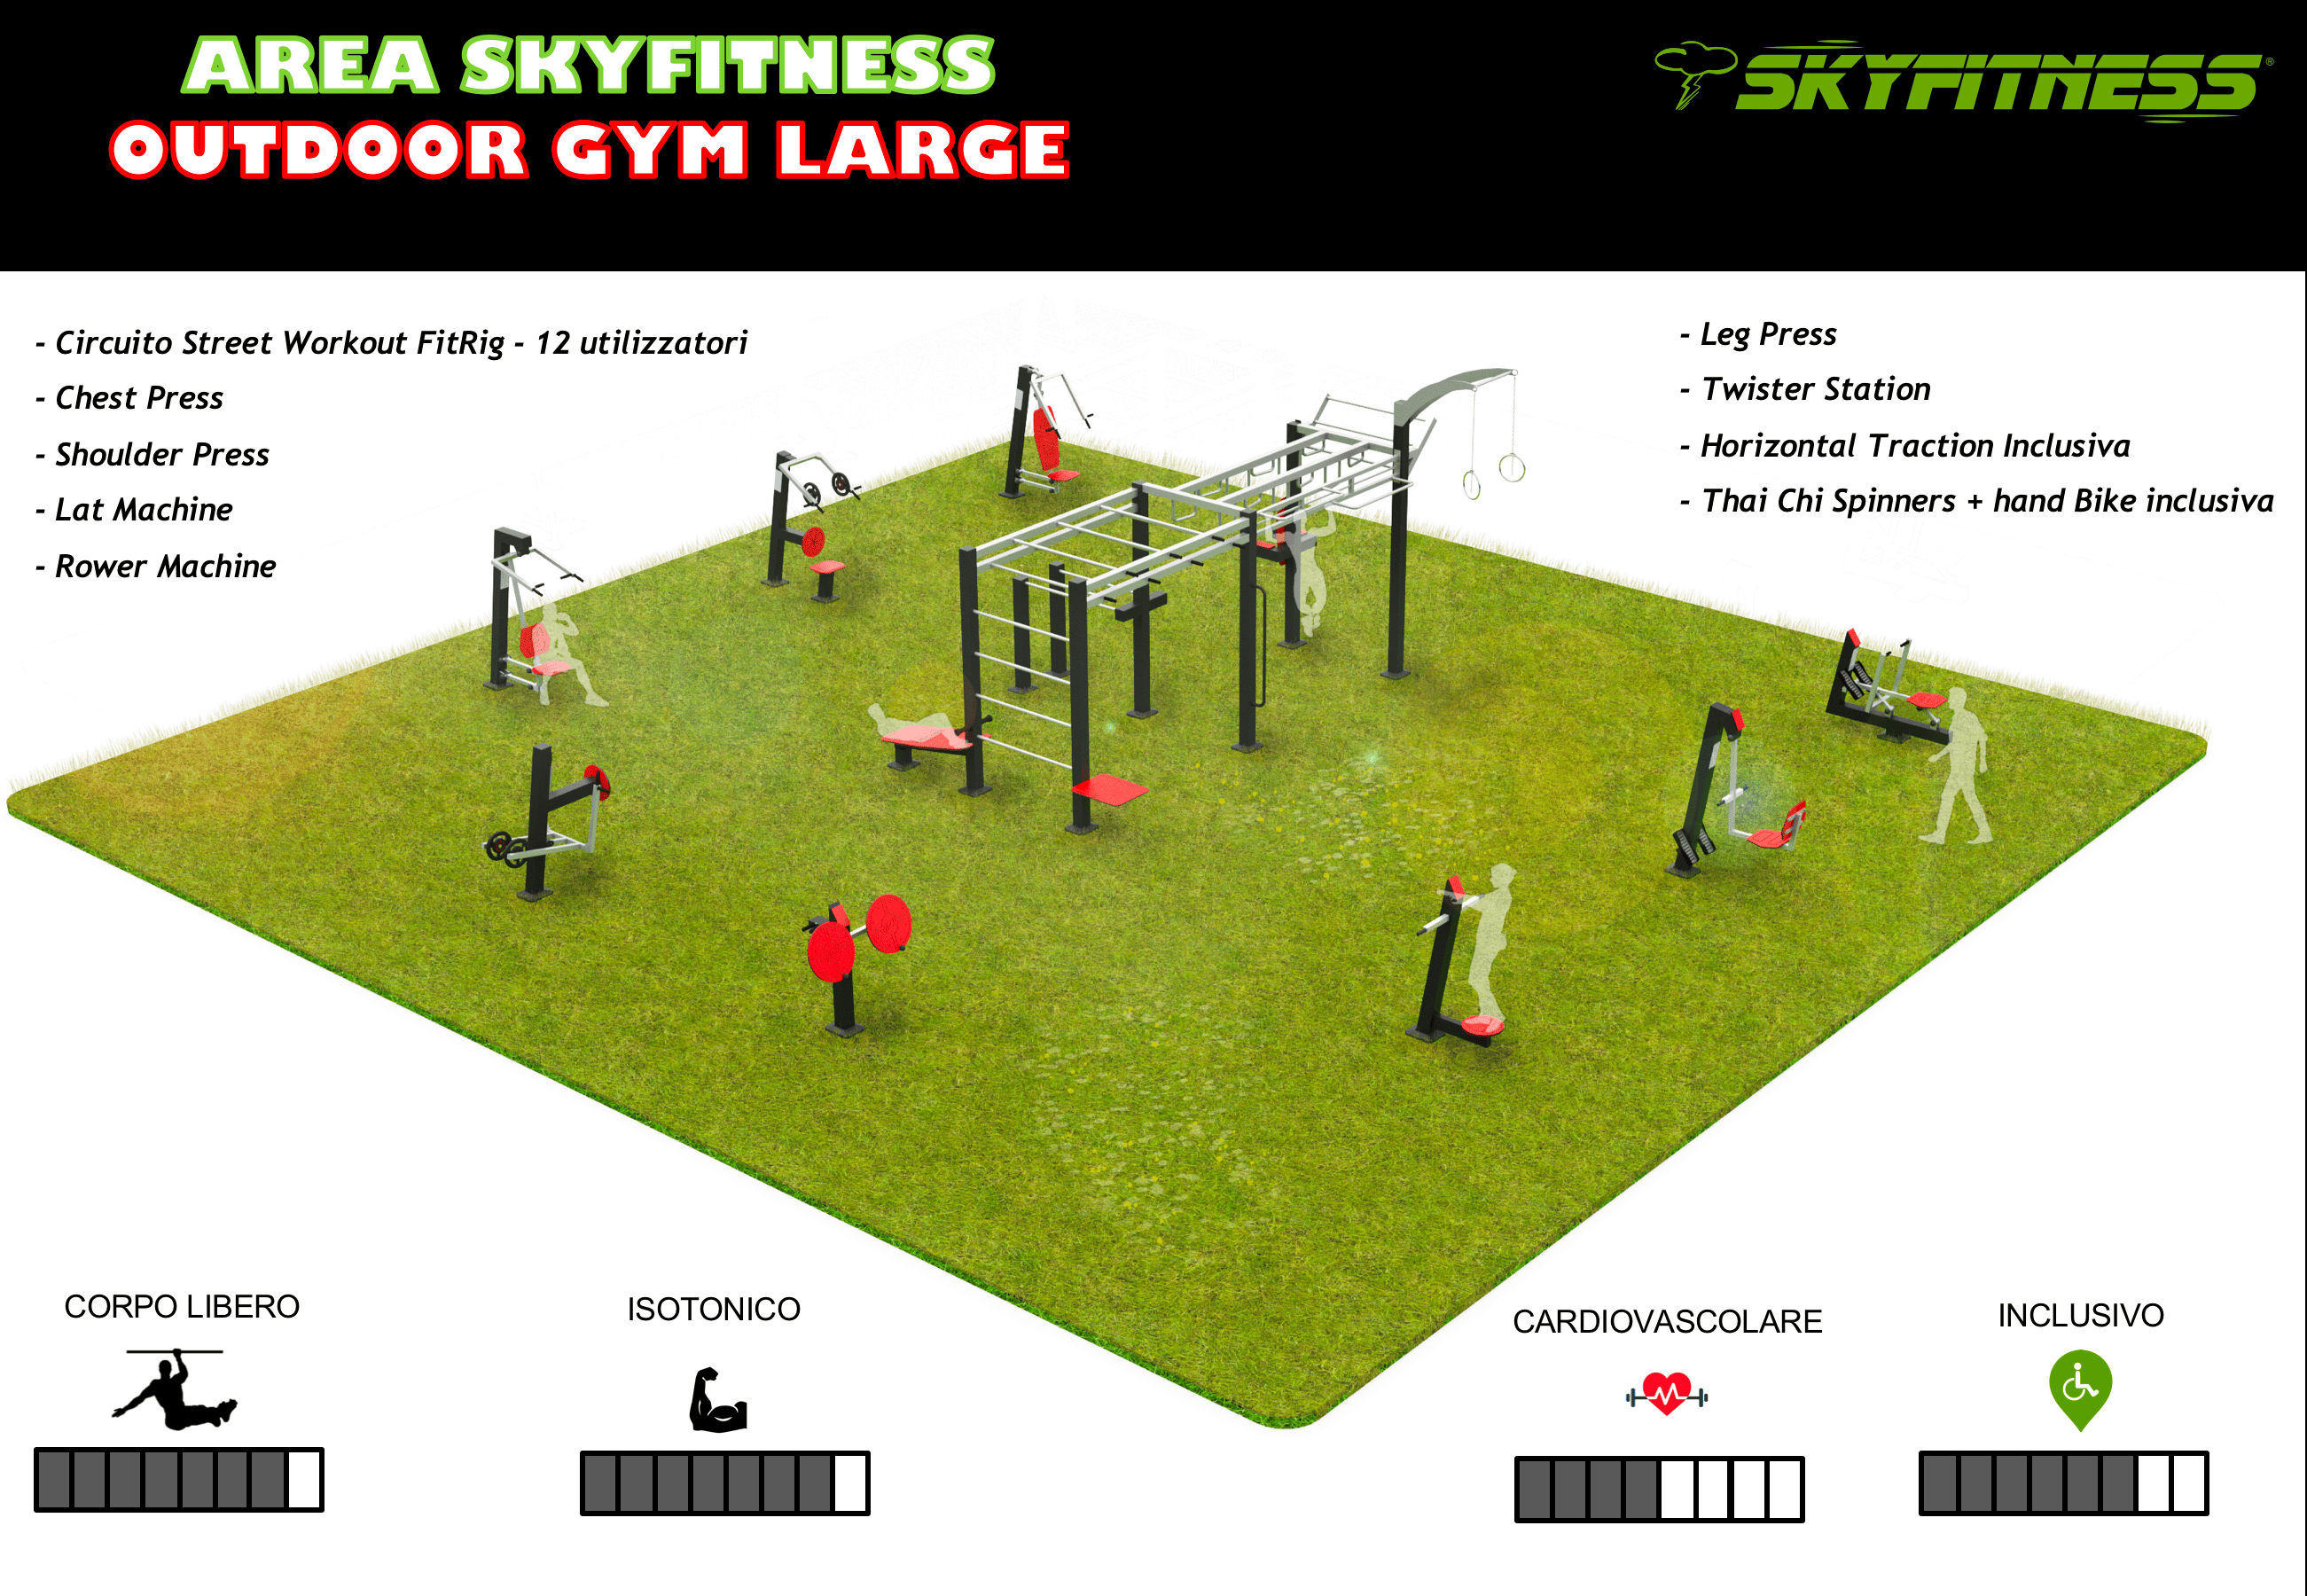 Outdoor Gym Large